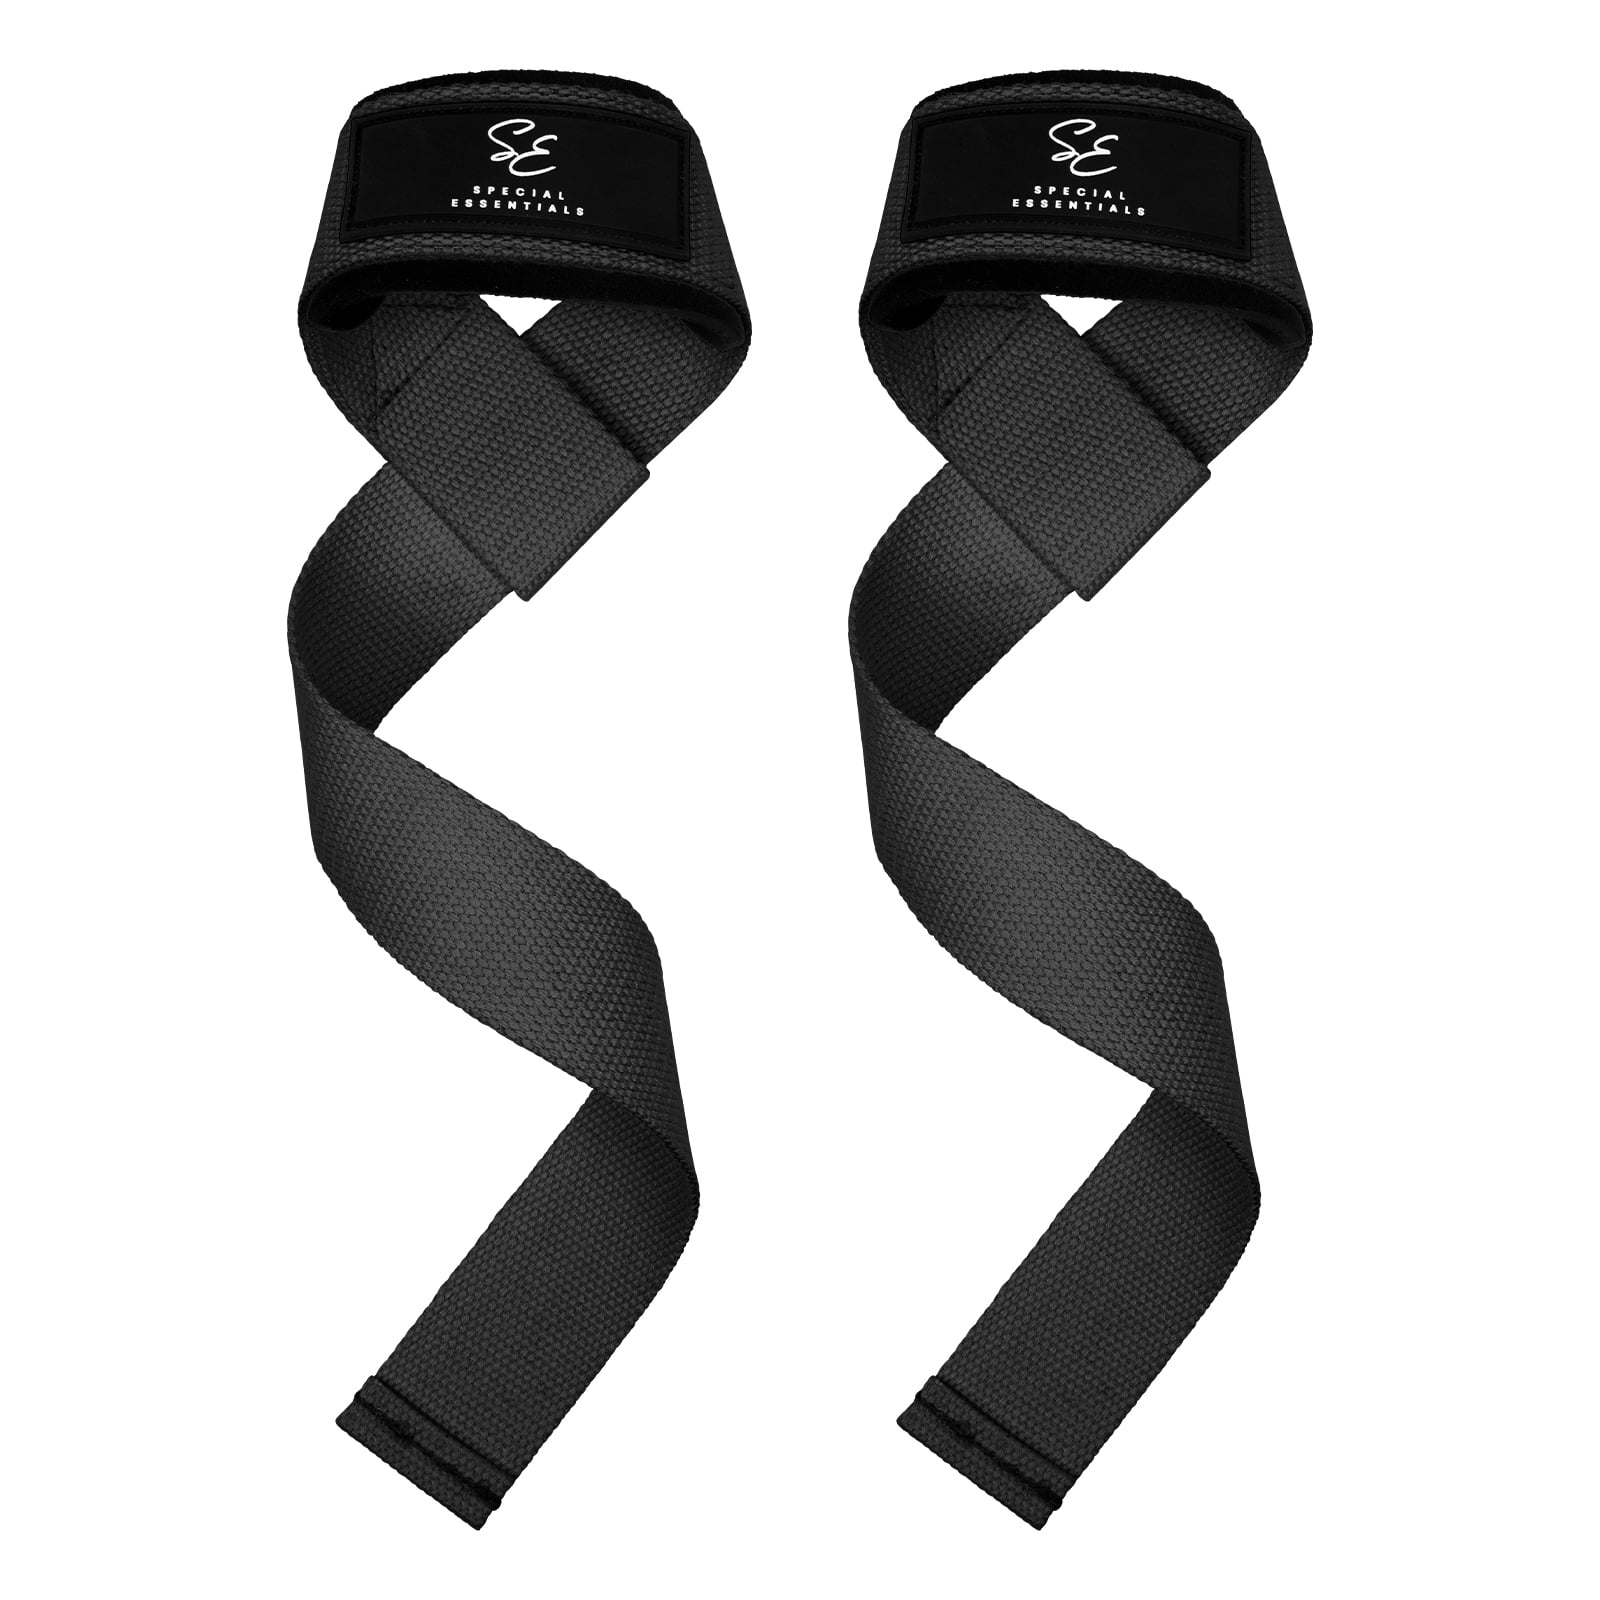 To 1.75 Inches Wide Lifting Straps